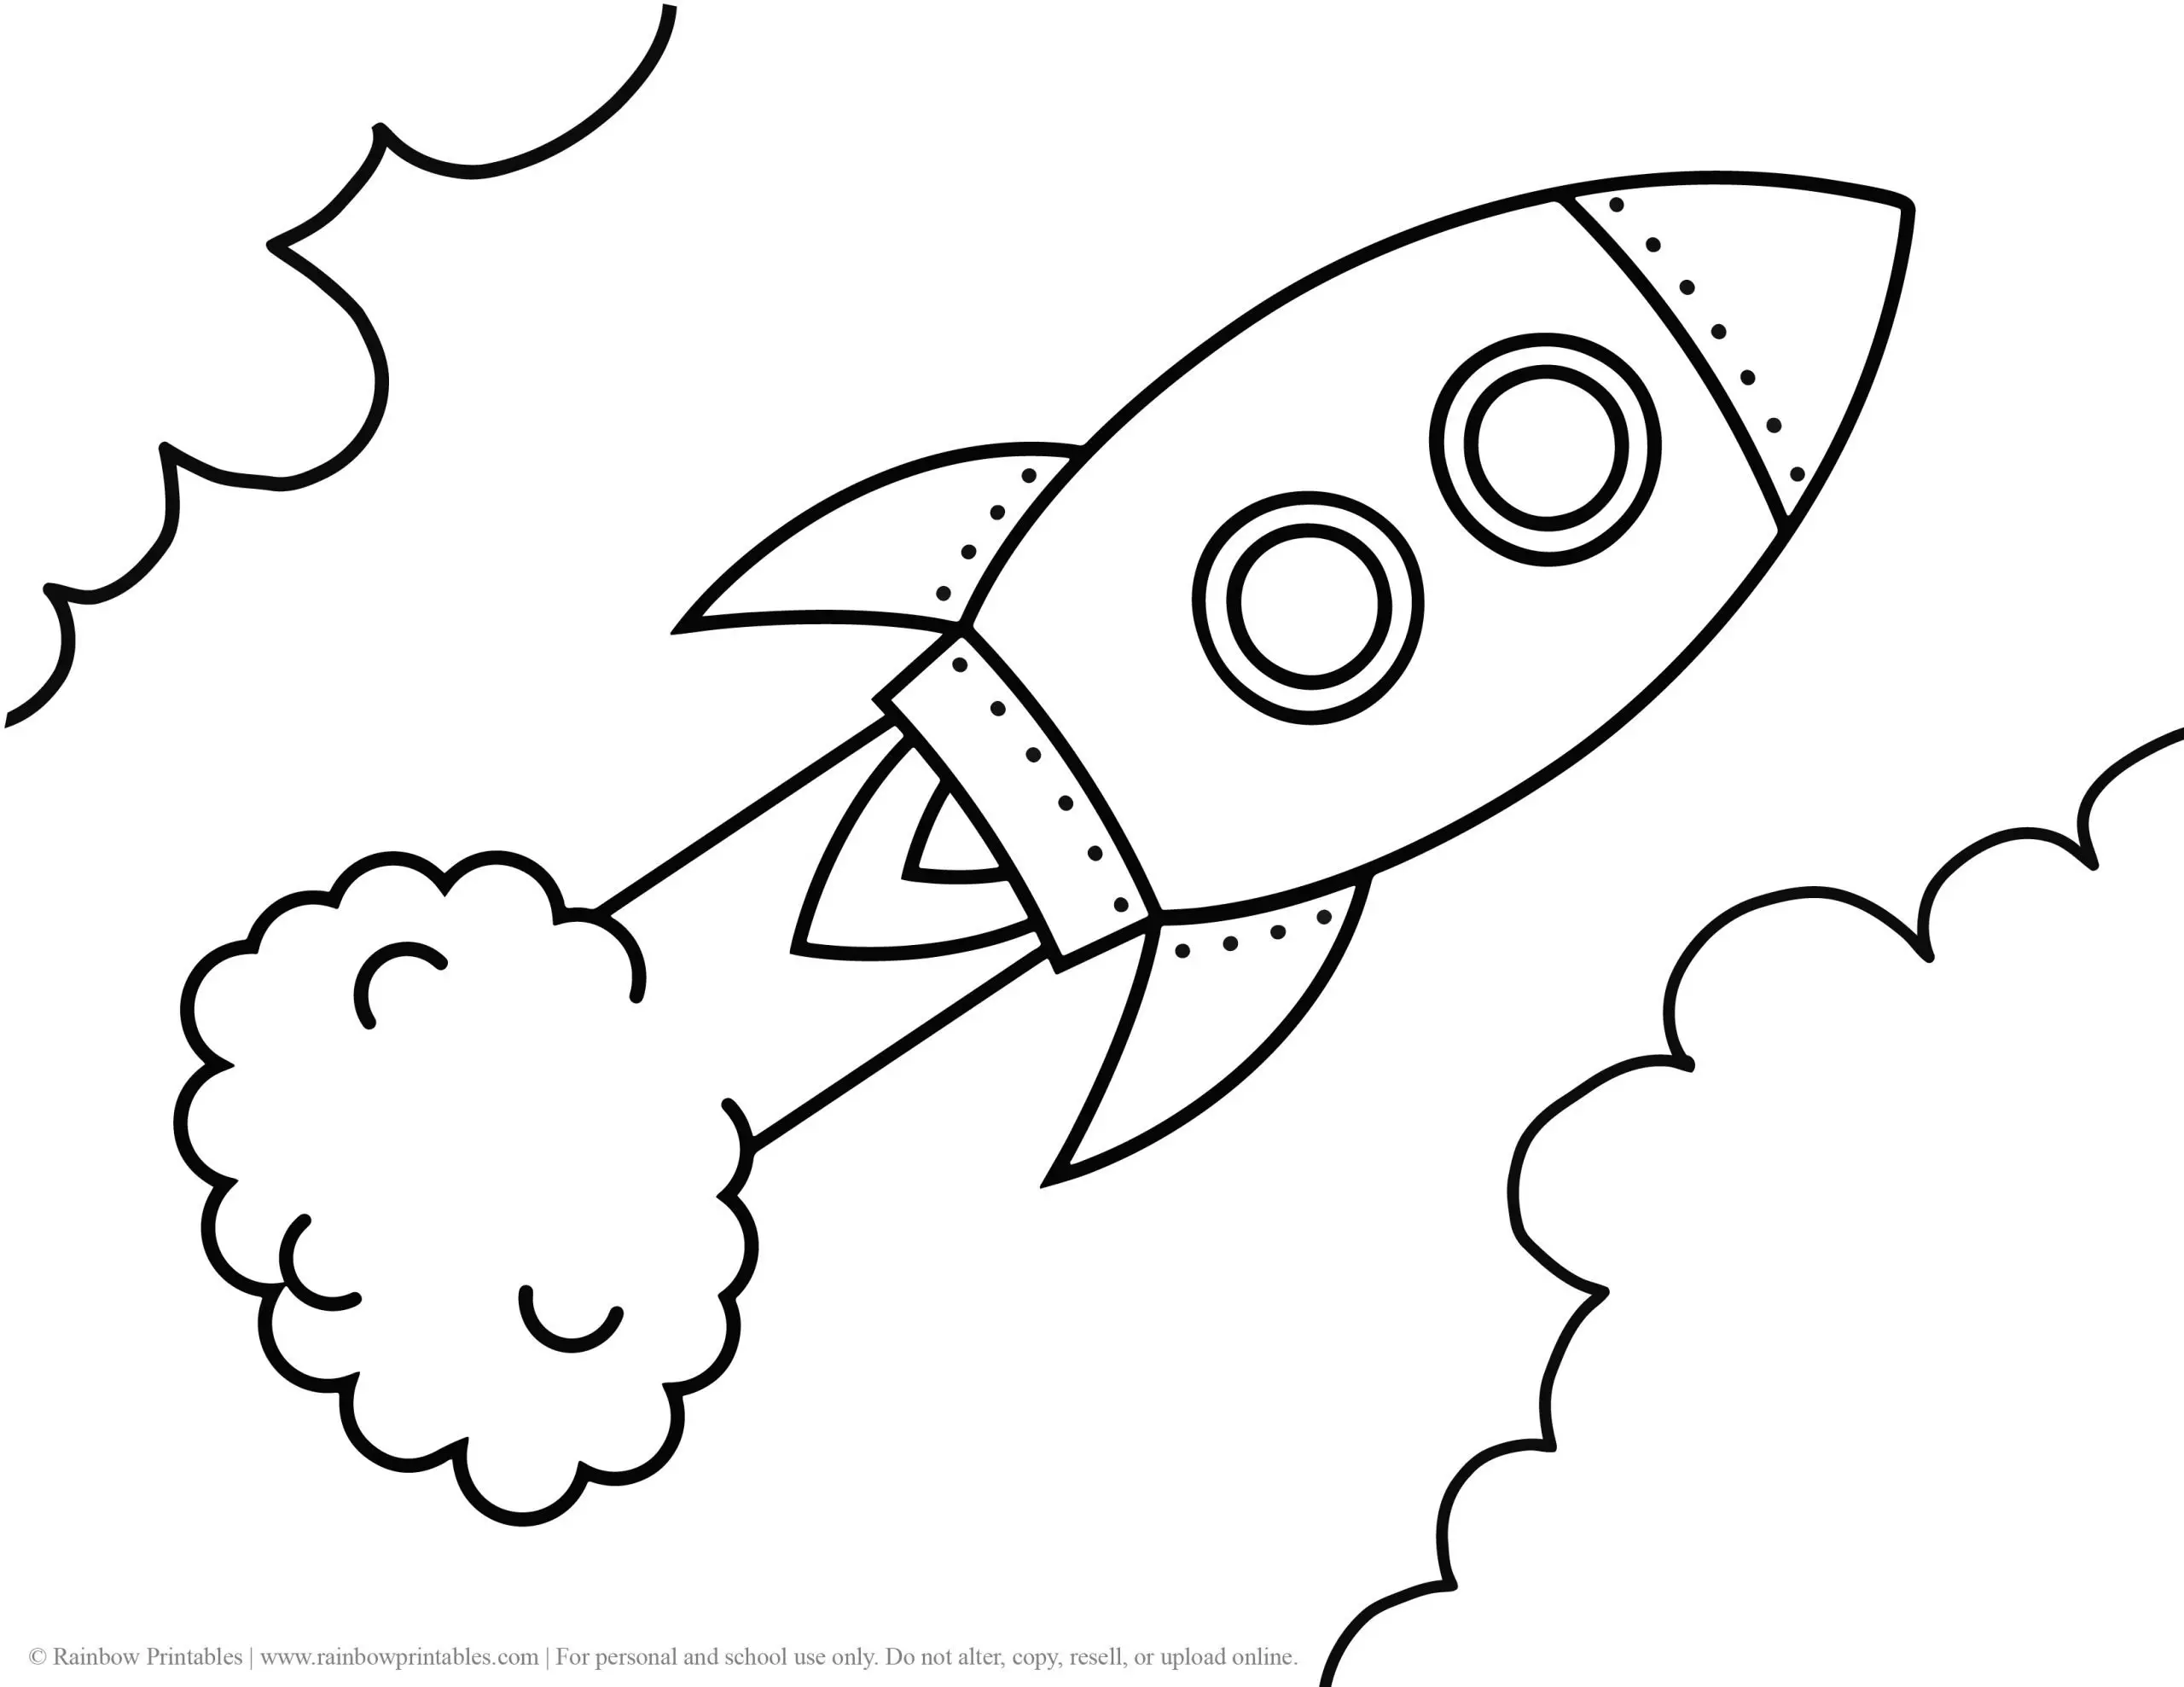 Rocketship Ship Space Meteor Launch Rocket Coloring Page for Kids